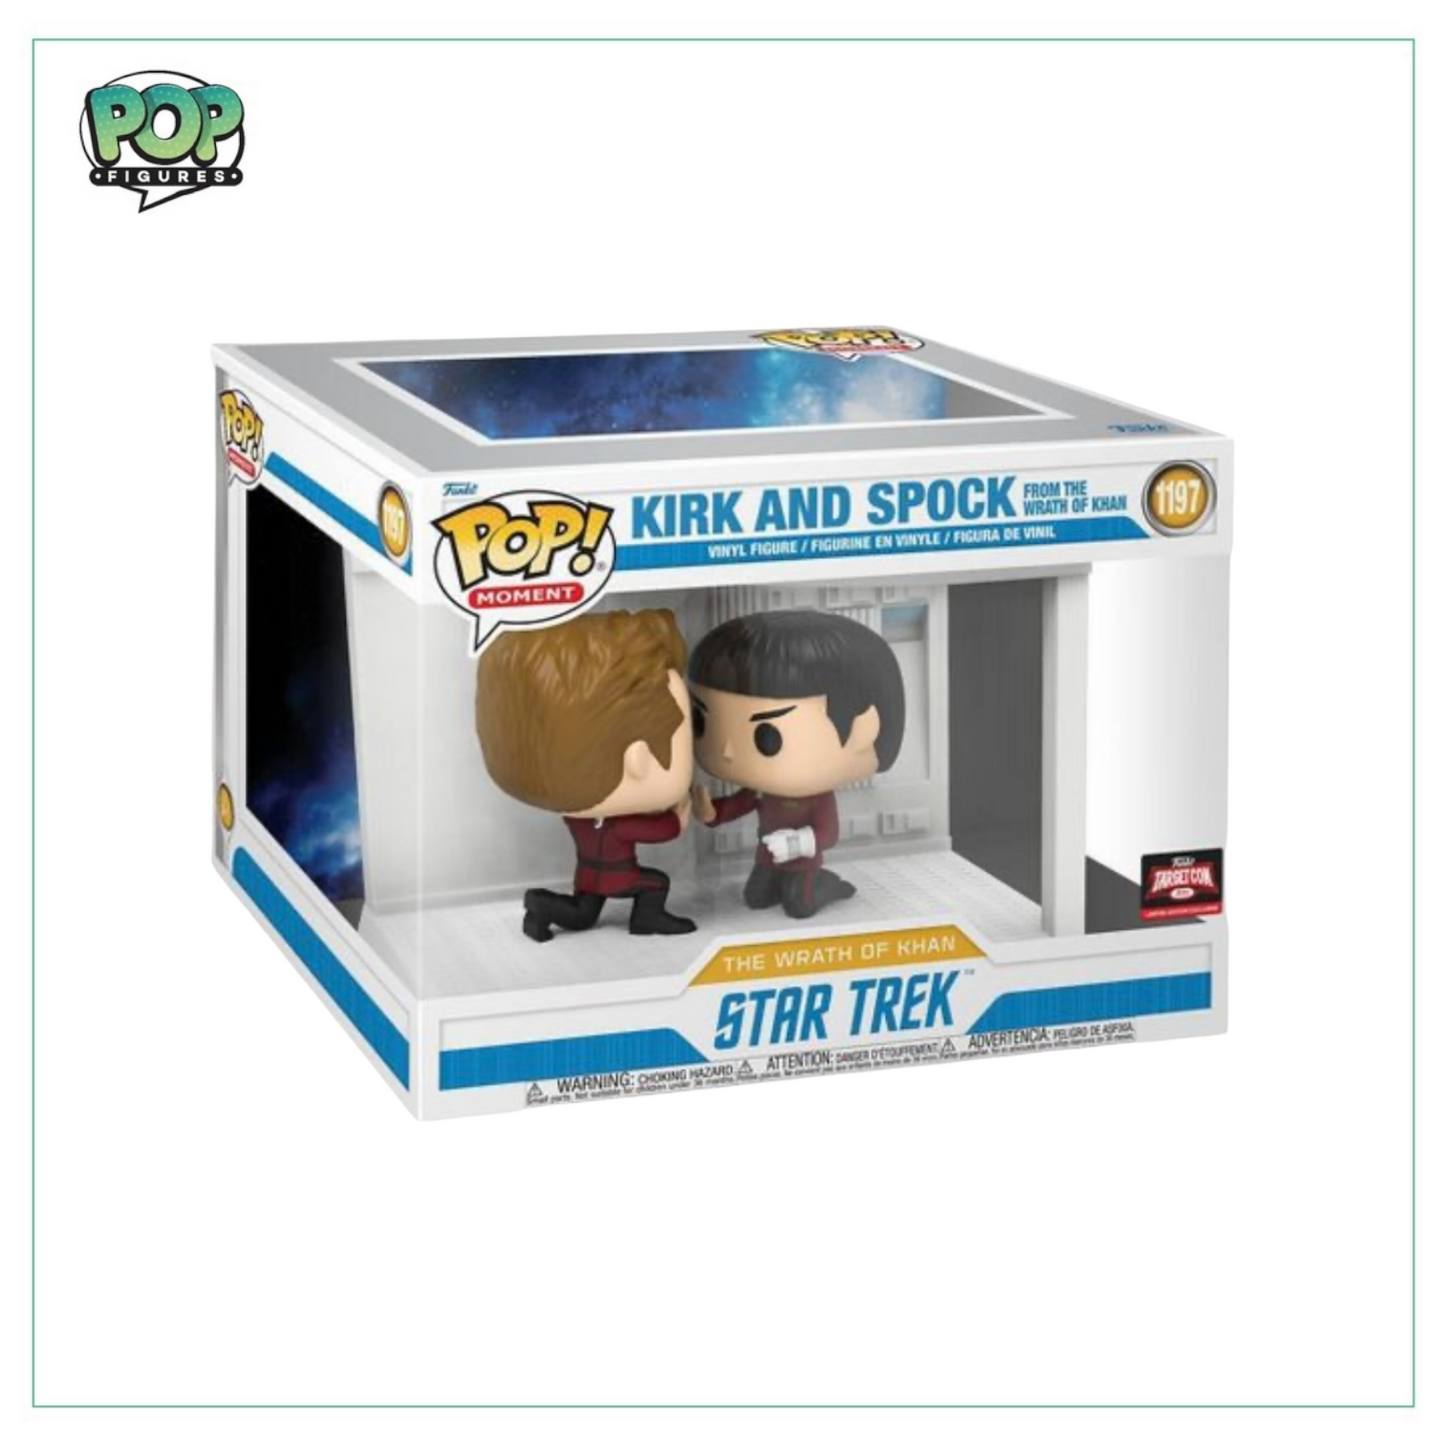 Kirk and Spock from The Wrath Of Khan #1197 Funko Pop! Moments Star Trek - Target Con Exclusive - Angry Cat